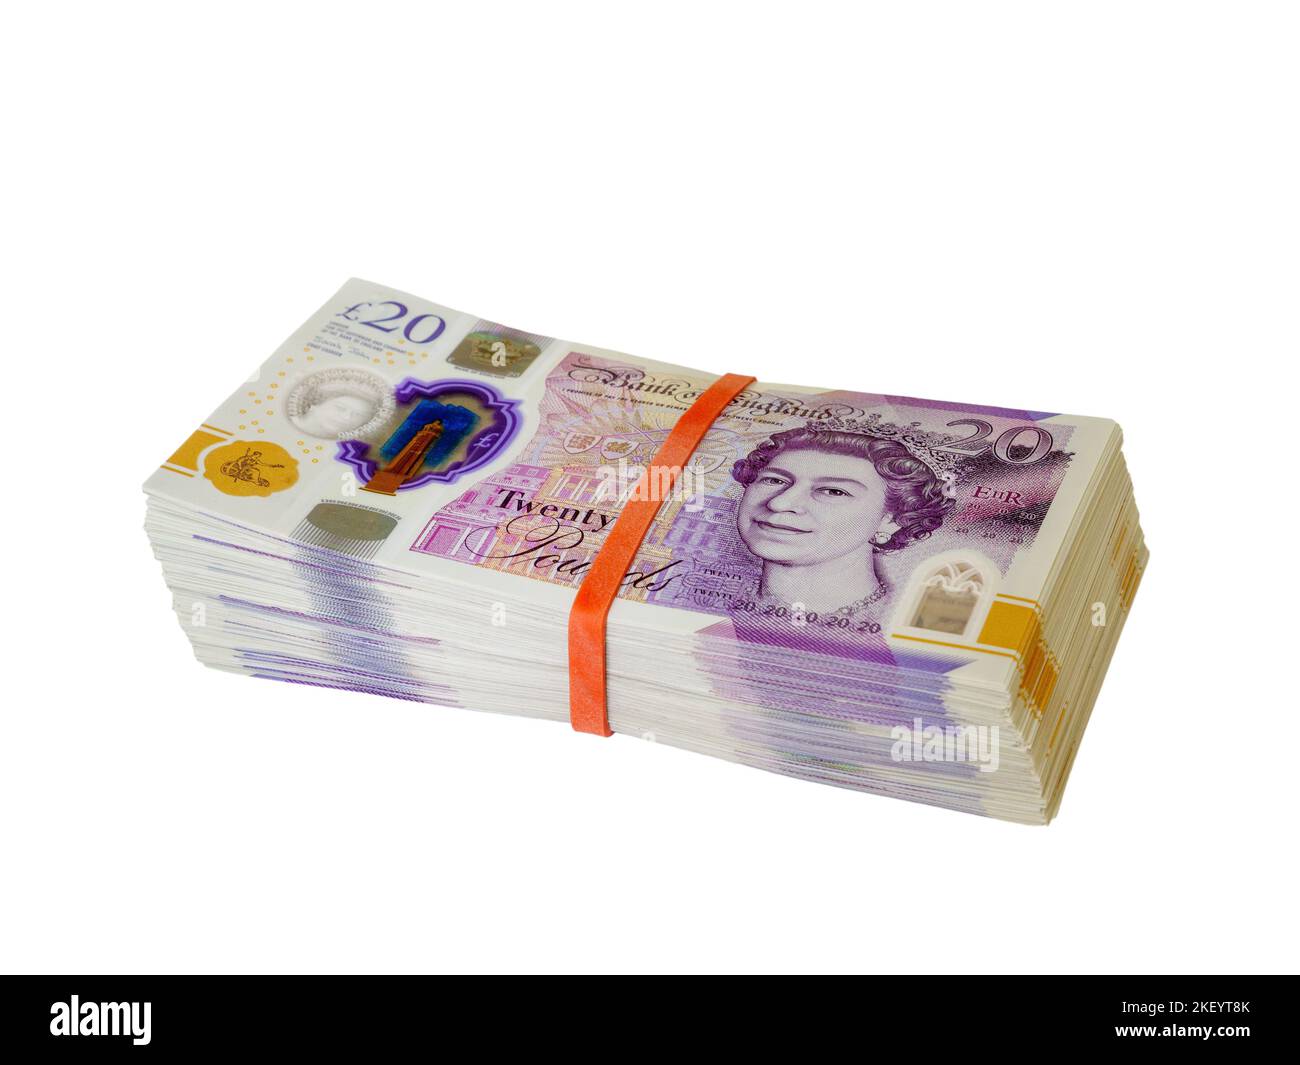 Large stack of money in the form of 20 British pound notes amounting to thousands in cash against a white cutout background Stock Photo